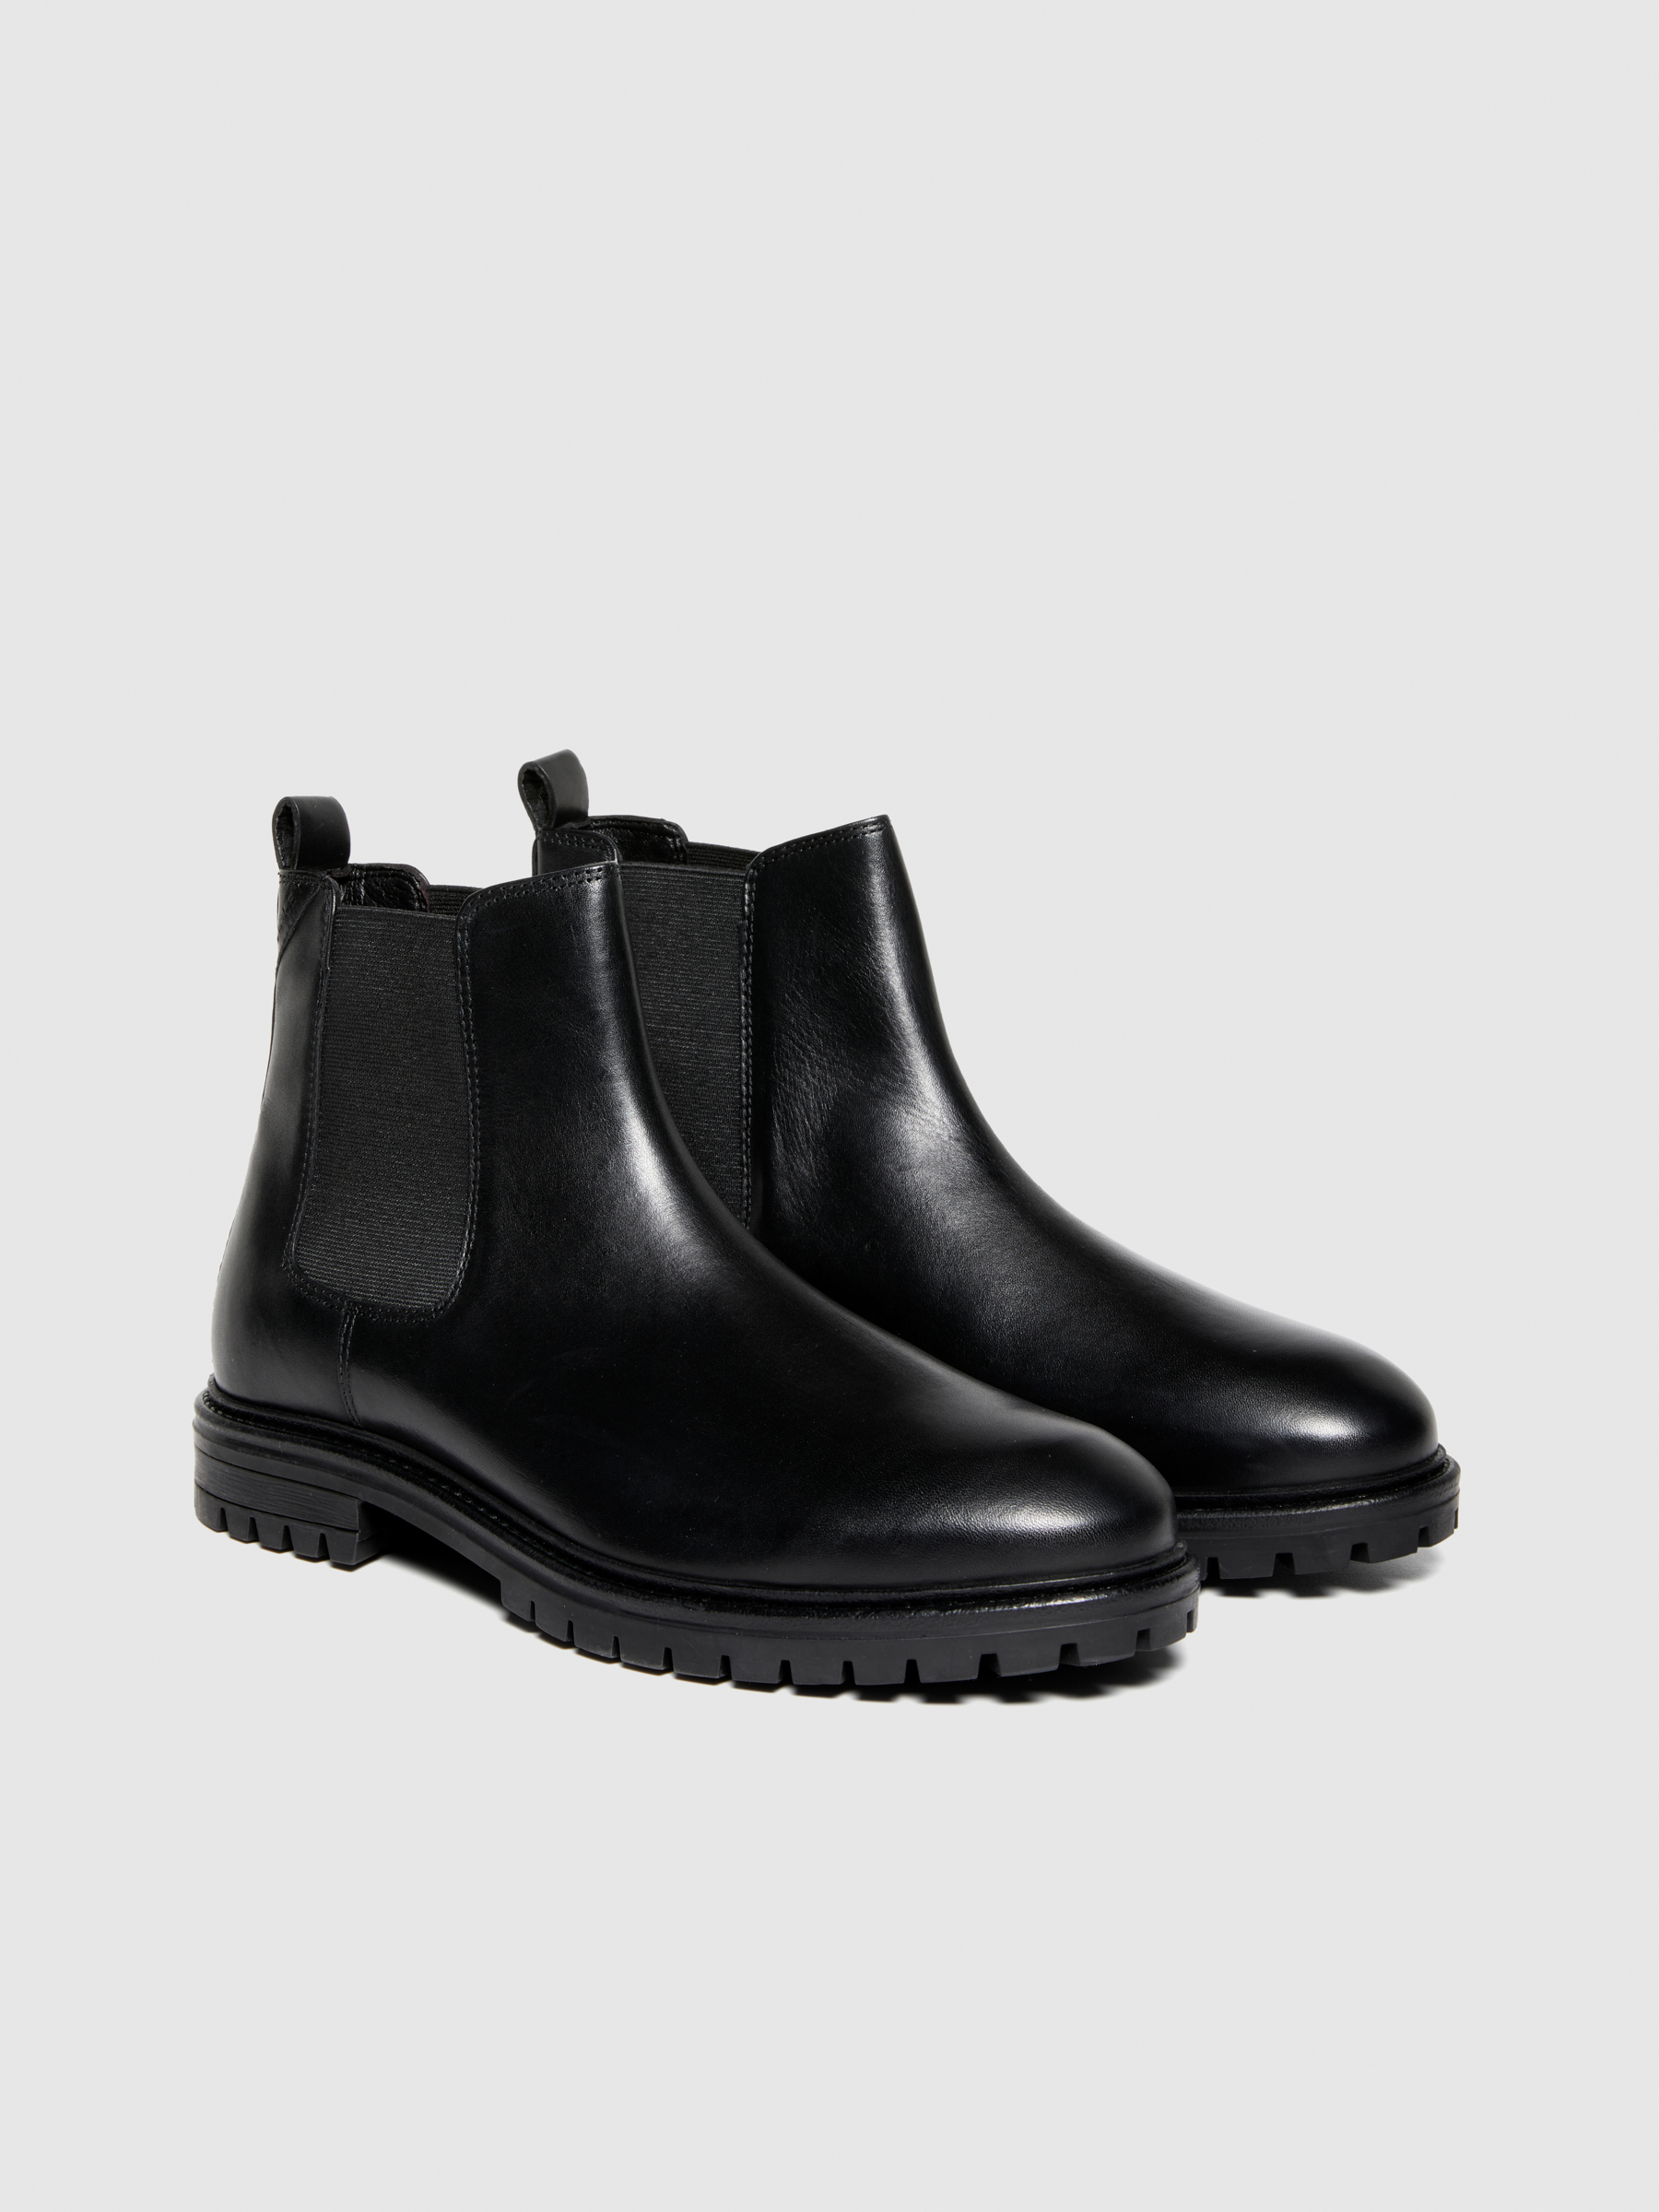 Sisley - Leather Chelsea Boots, Man, Black, Size: 43